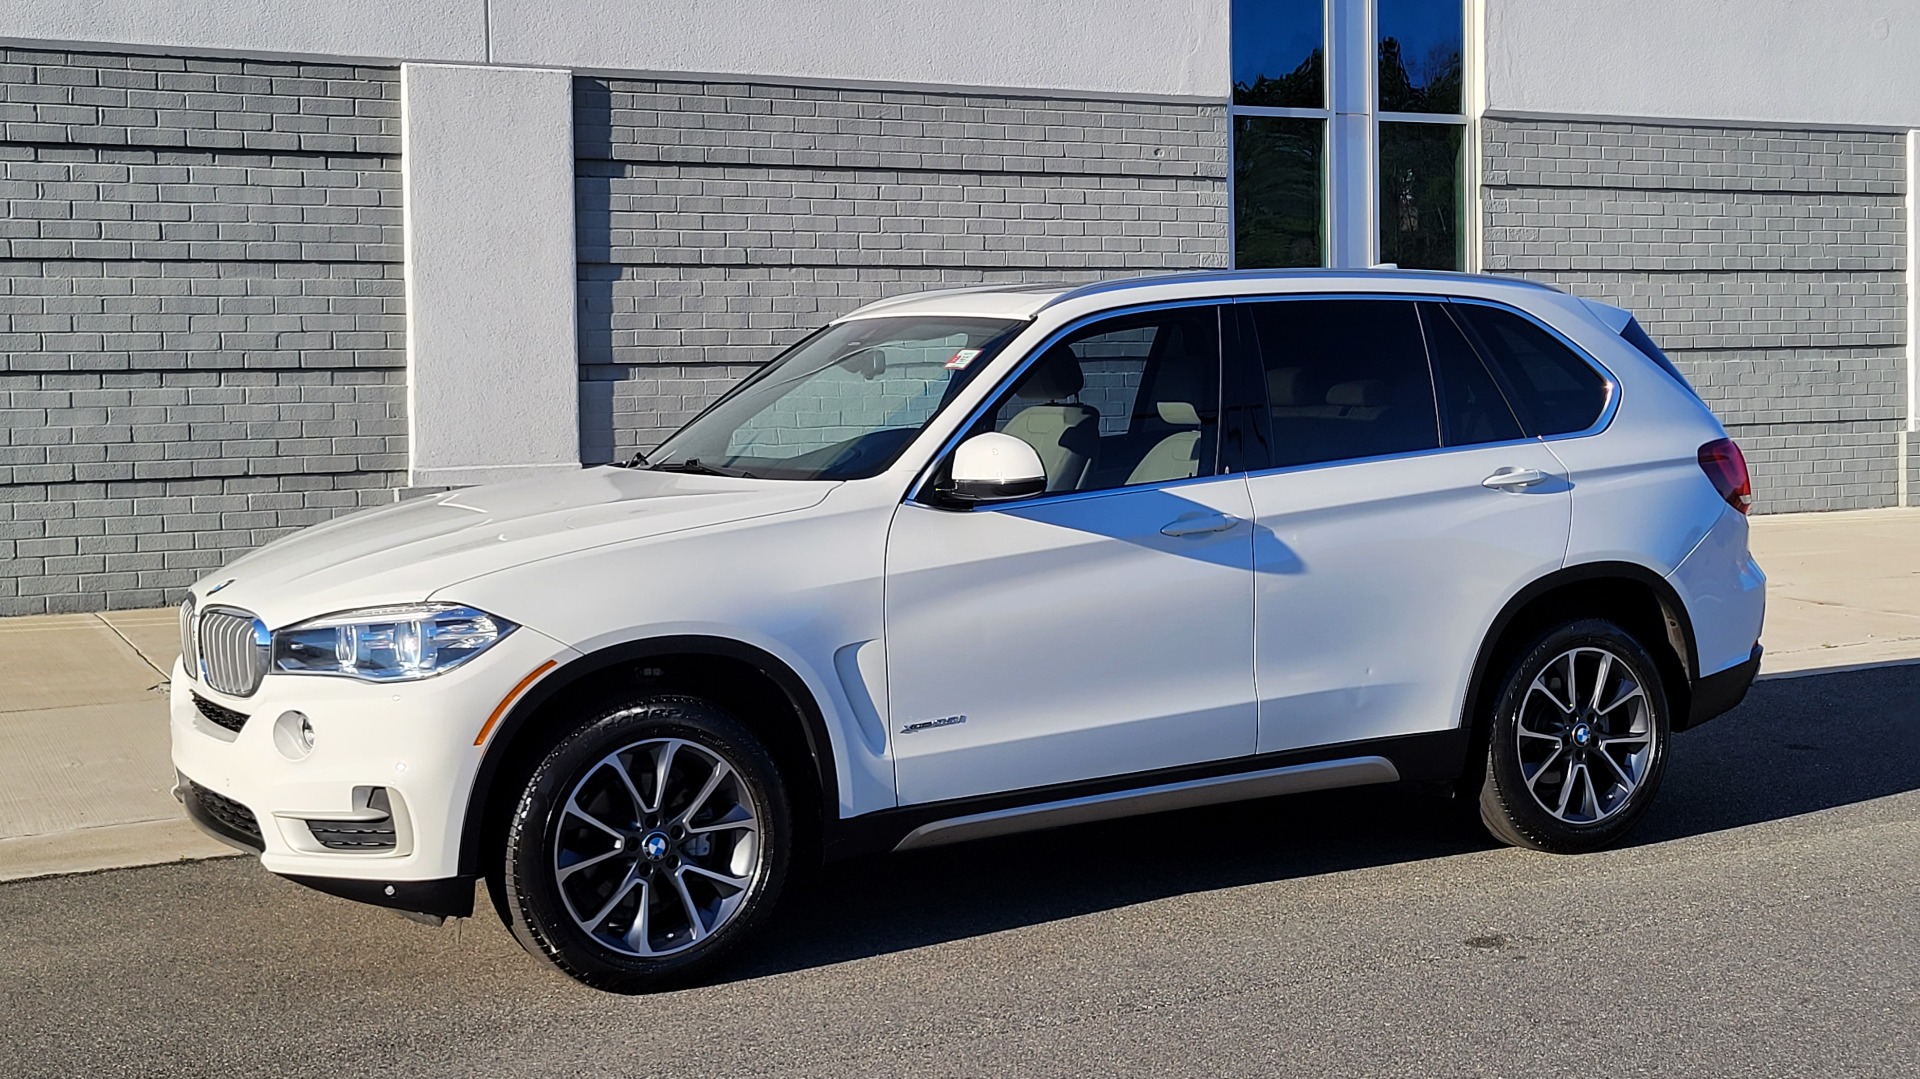 Used 2018 BMW X5 XDRIVE35I PREMIUM / DRVR ASST / HUD / WIRELESS CHARGING / HEATED SEATS for sale Sold at Formula Imports in Charlotte NC 28227 3